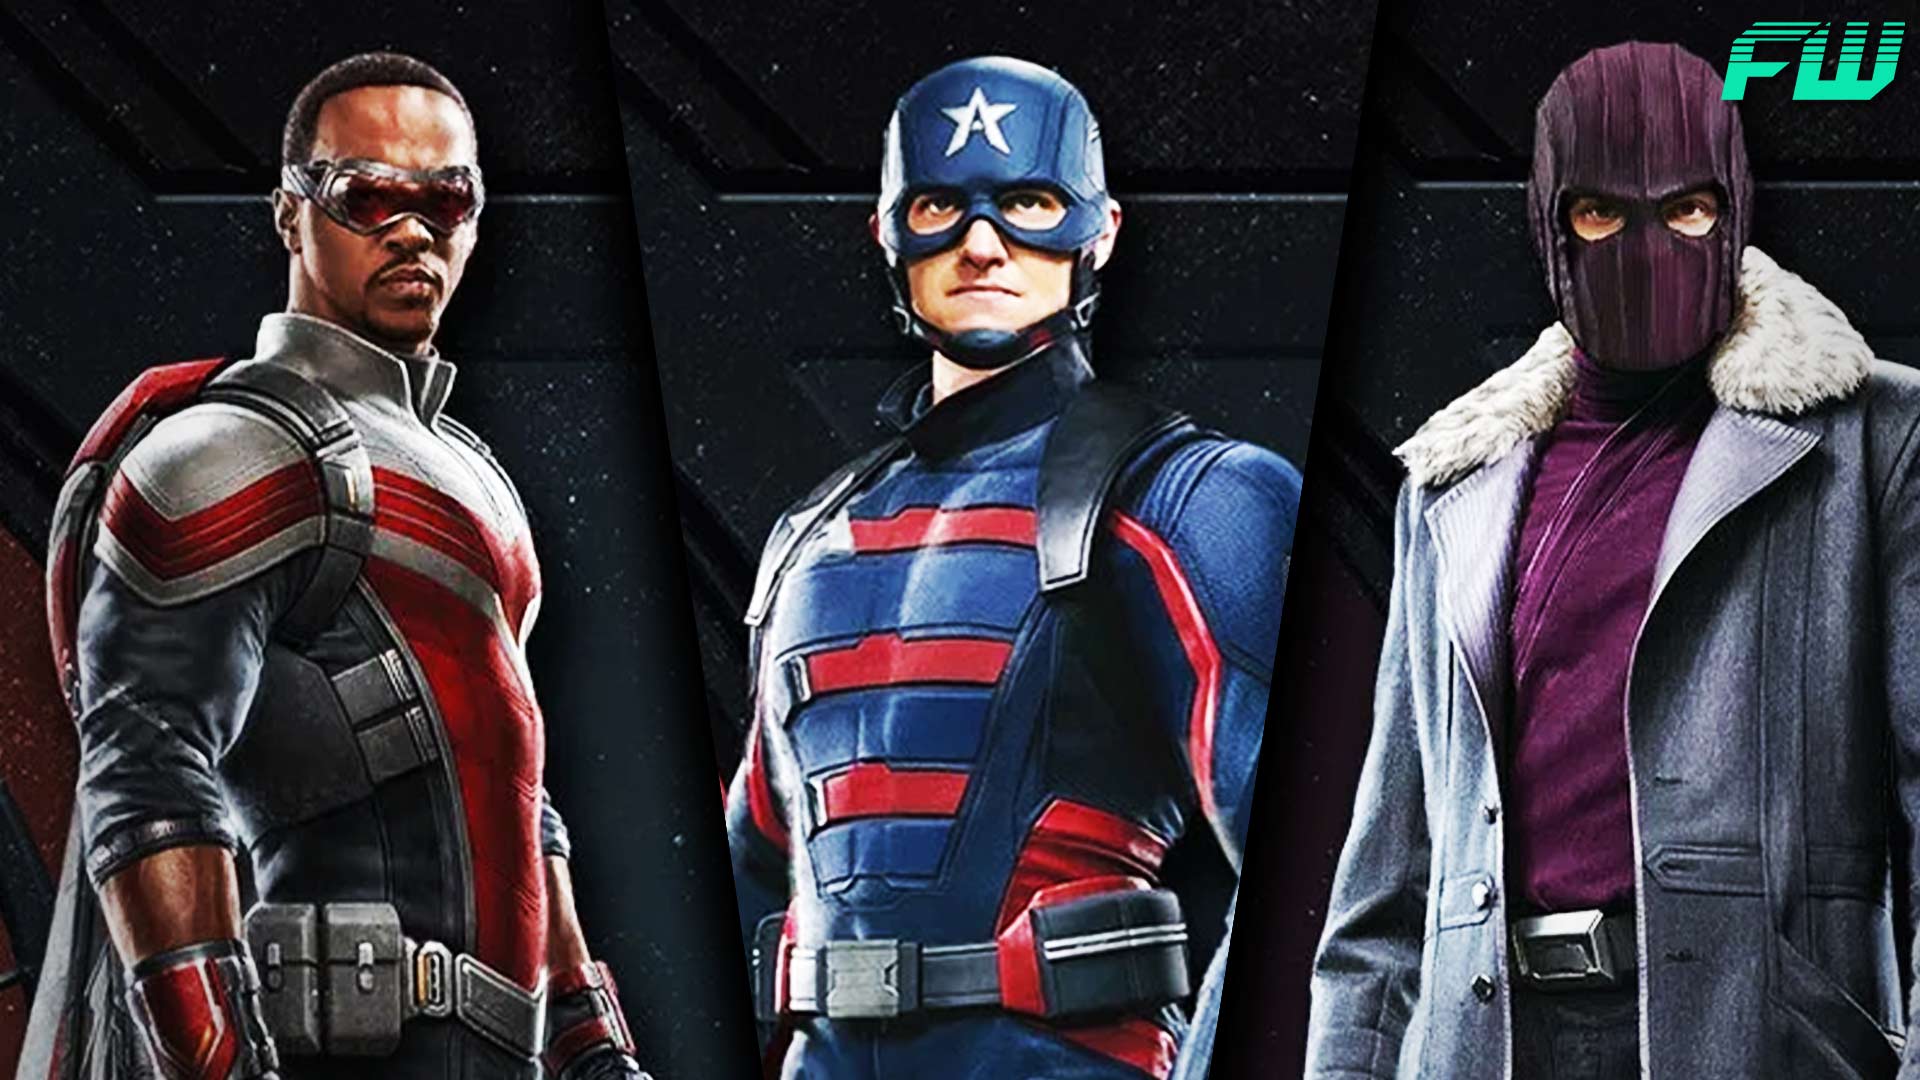 Falcon & Winter Soldier Image Reveal U.S. Agent's Captain America Suit, And More